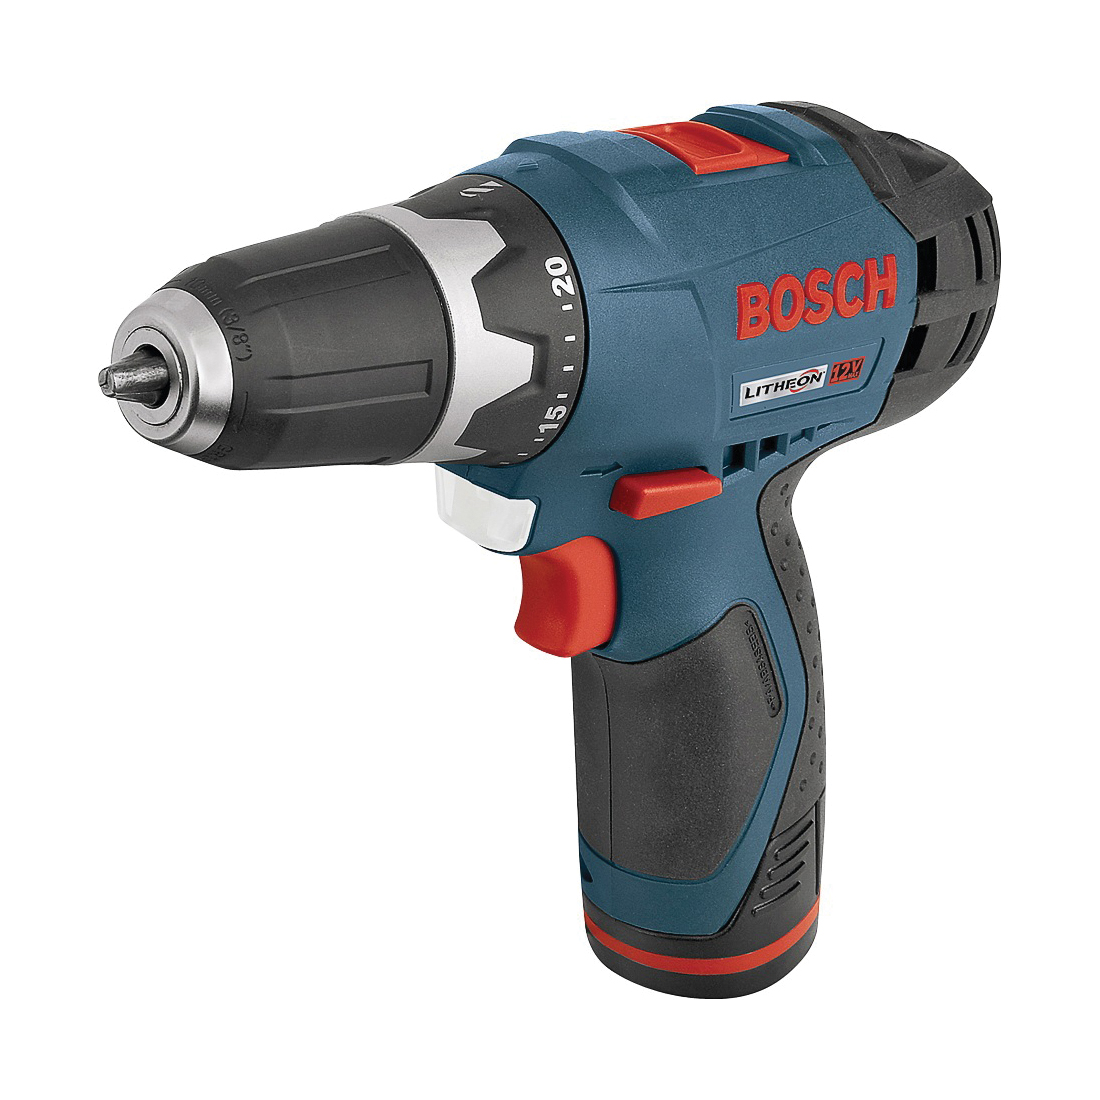 Bosch PS31-2A Drill/Driver Kit, Battery Included, 12 V, 3/8 in Chuck, Single Sleeve Chuck - 2